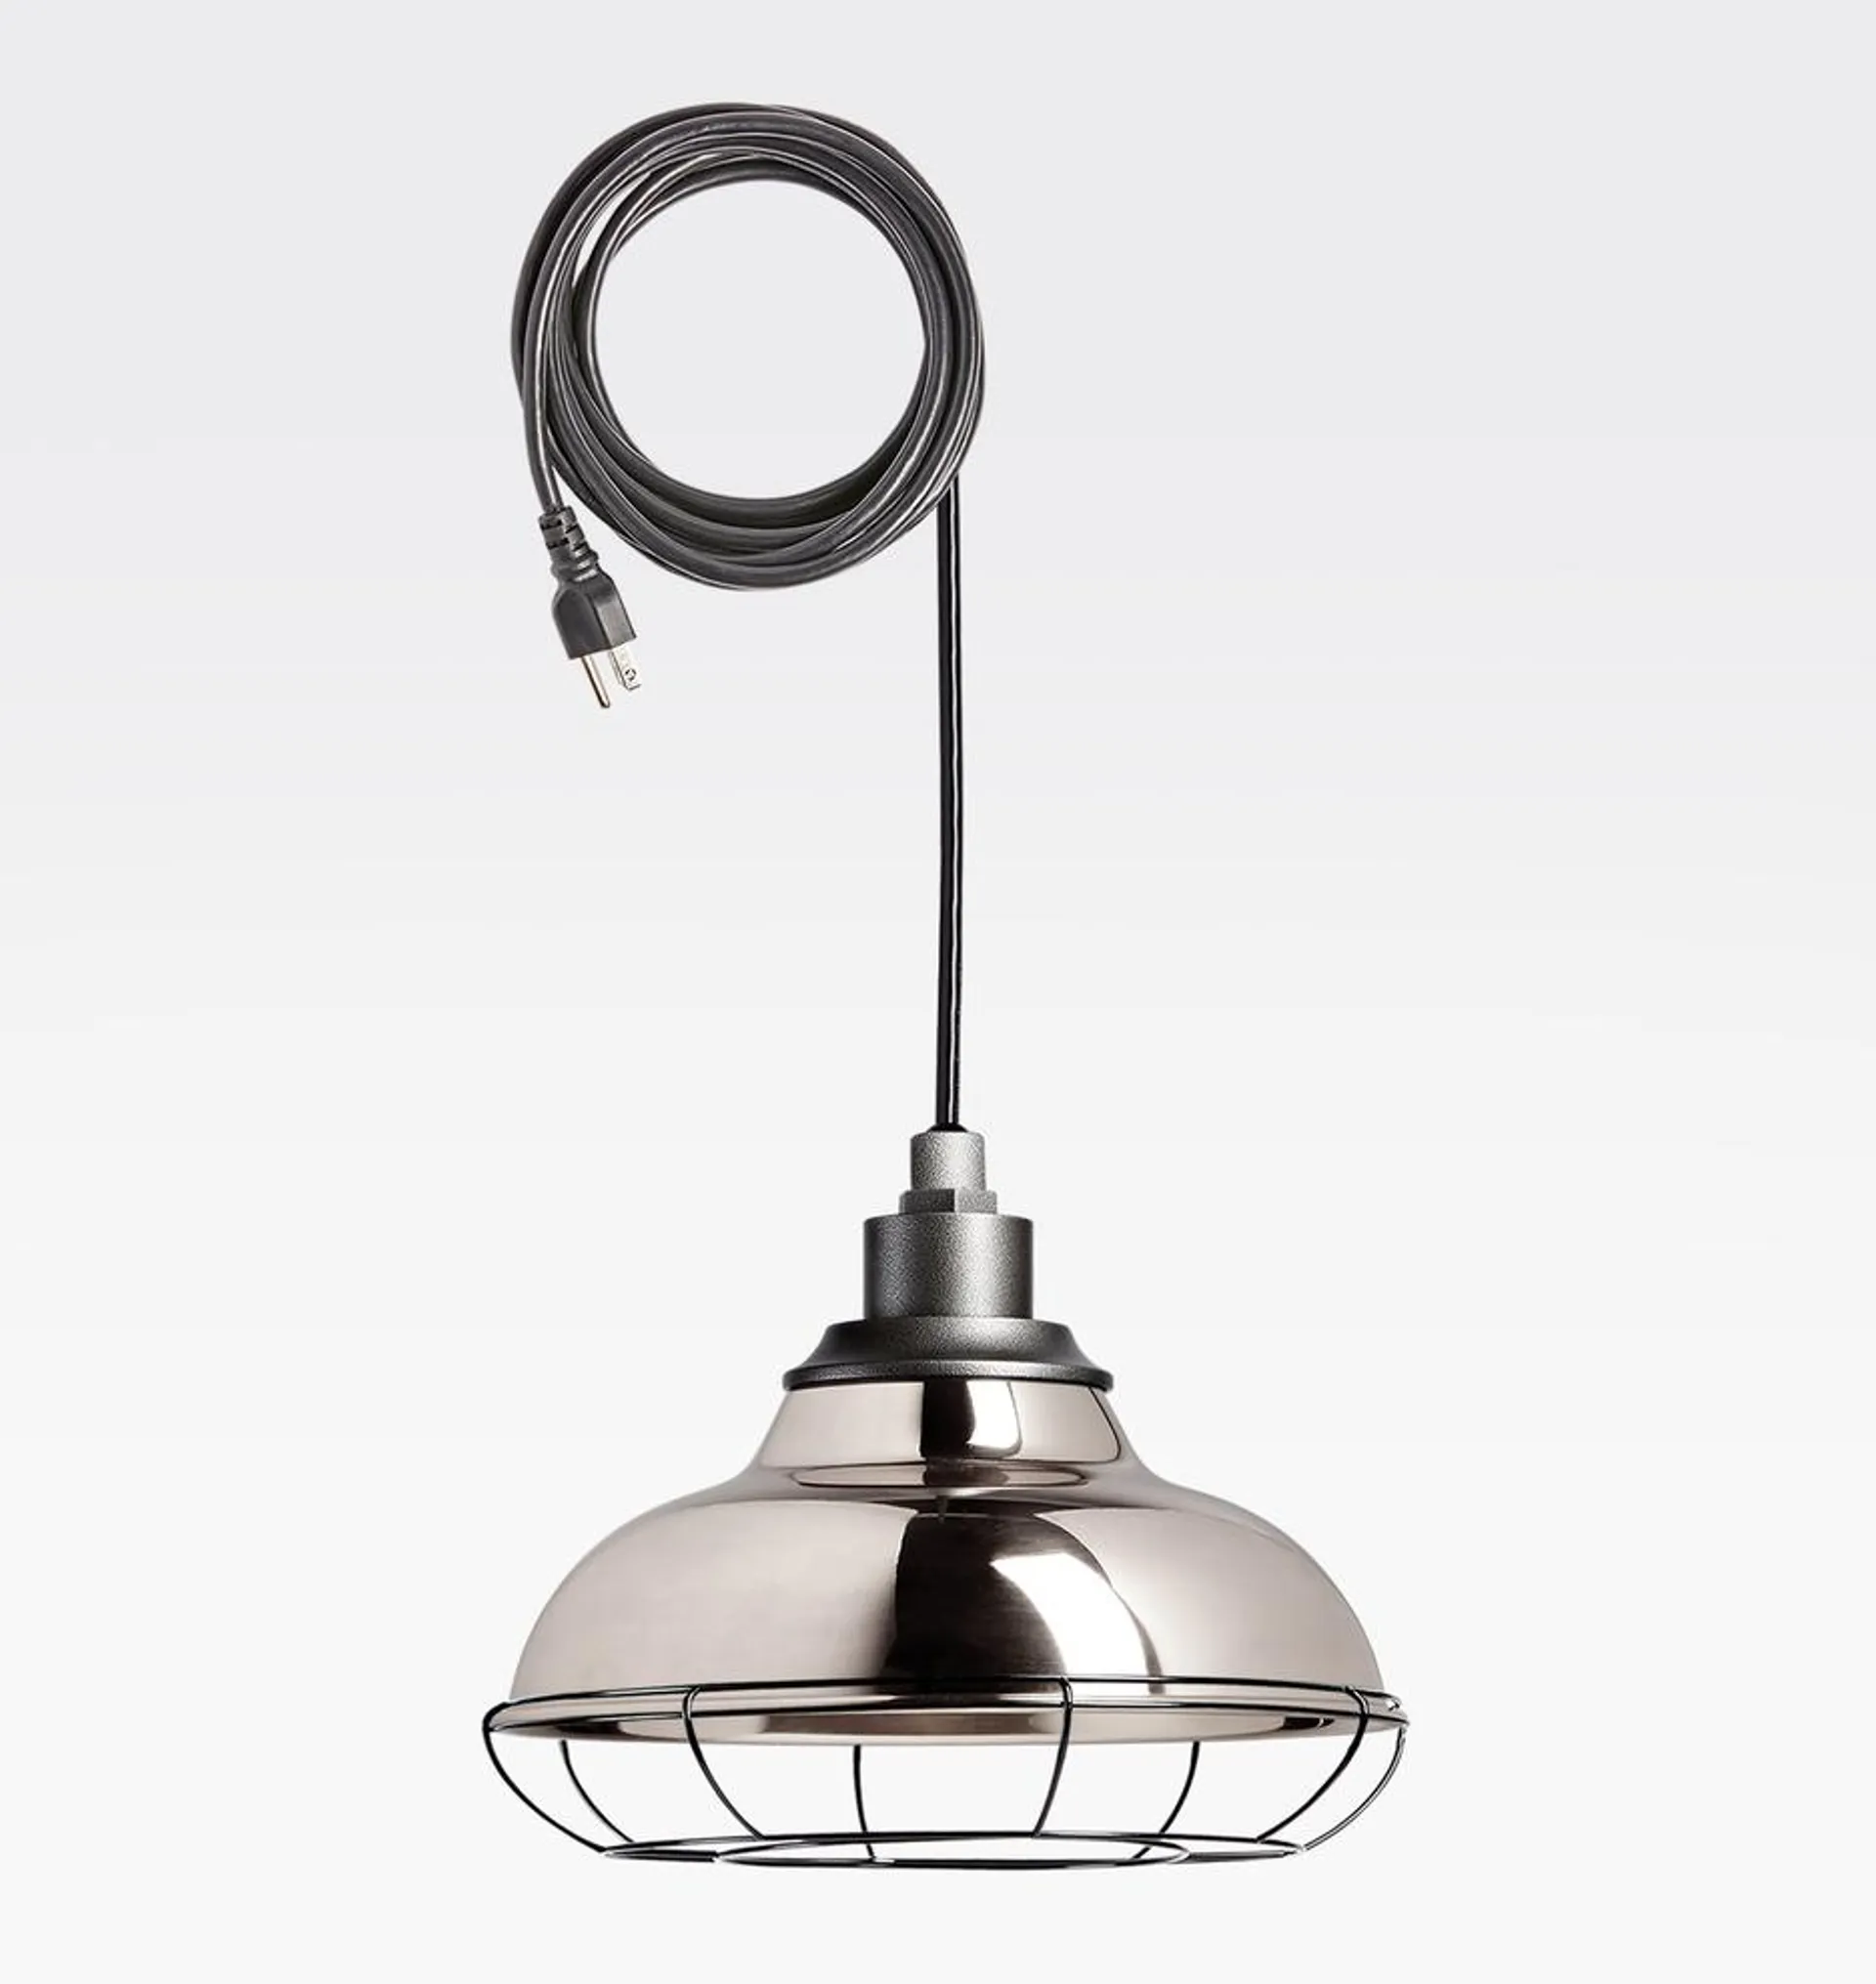 Carson 12" Plug-in Indoor/Outdoor Pendant with Cage